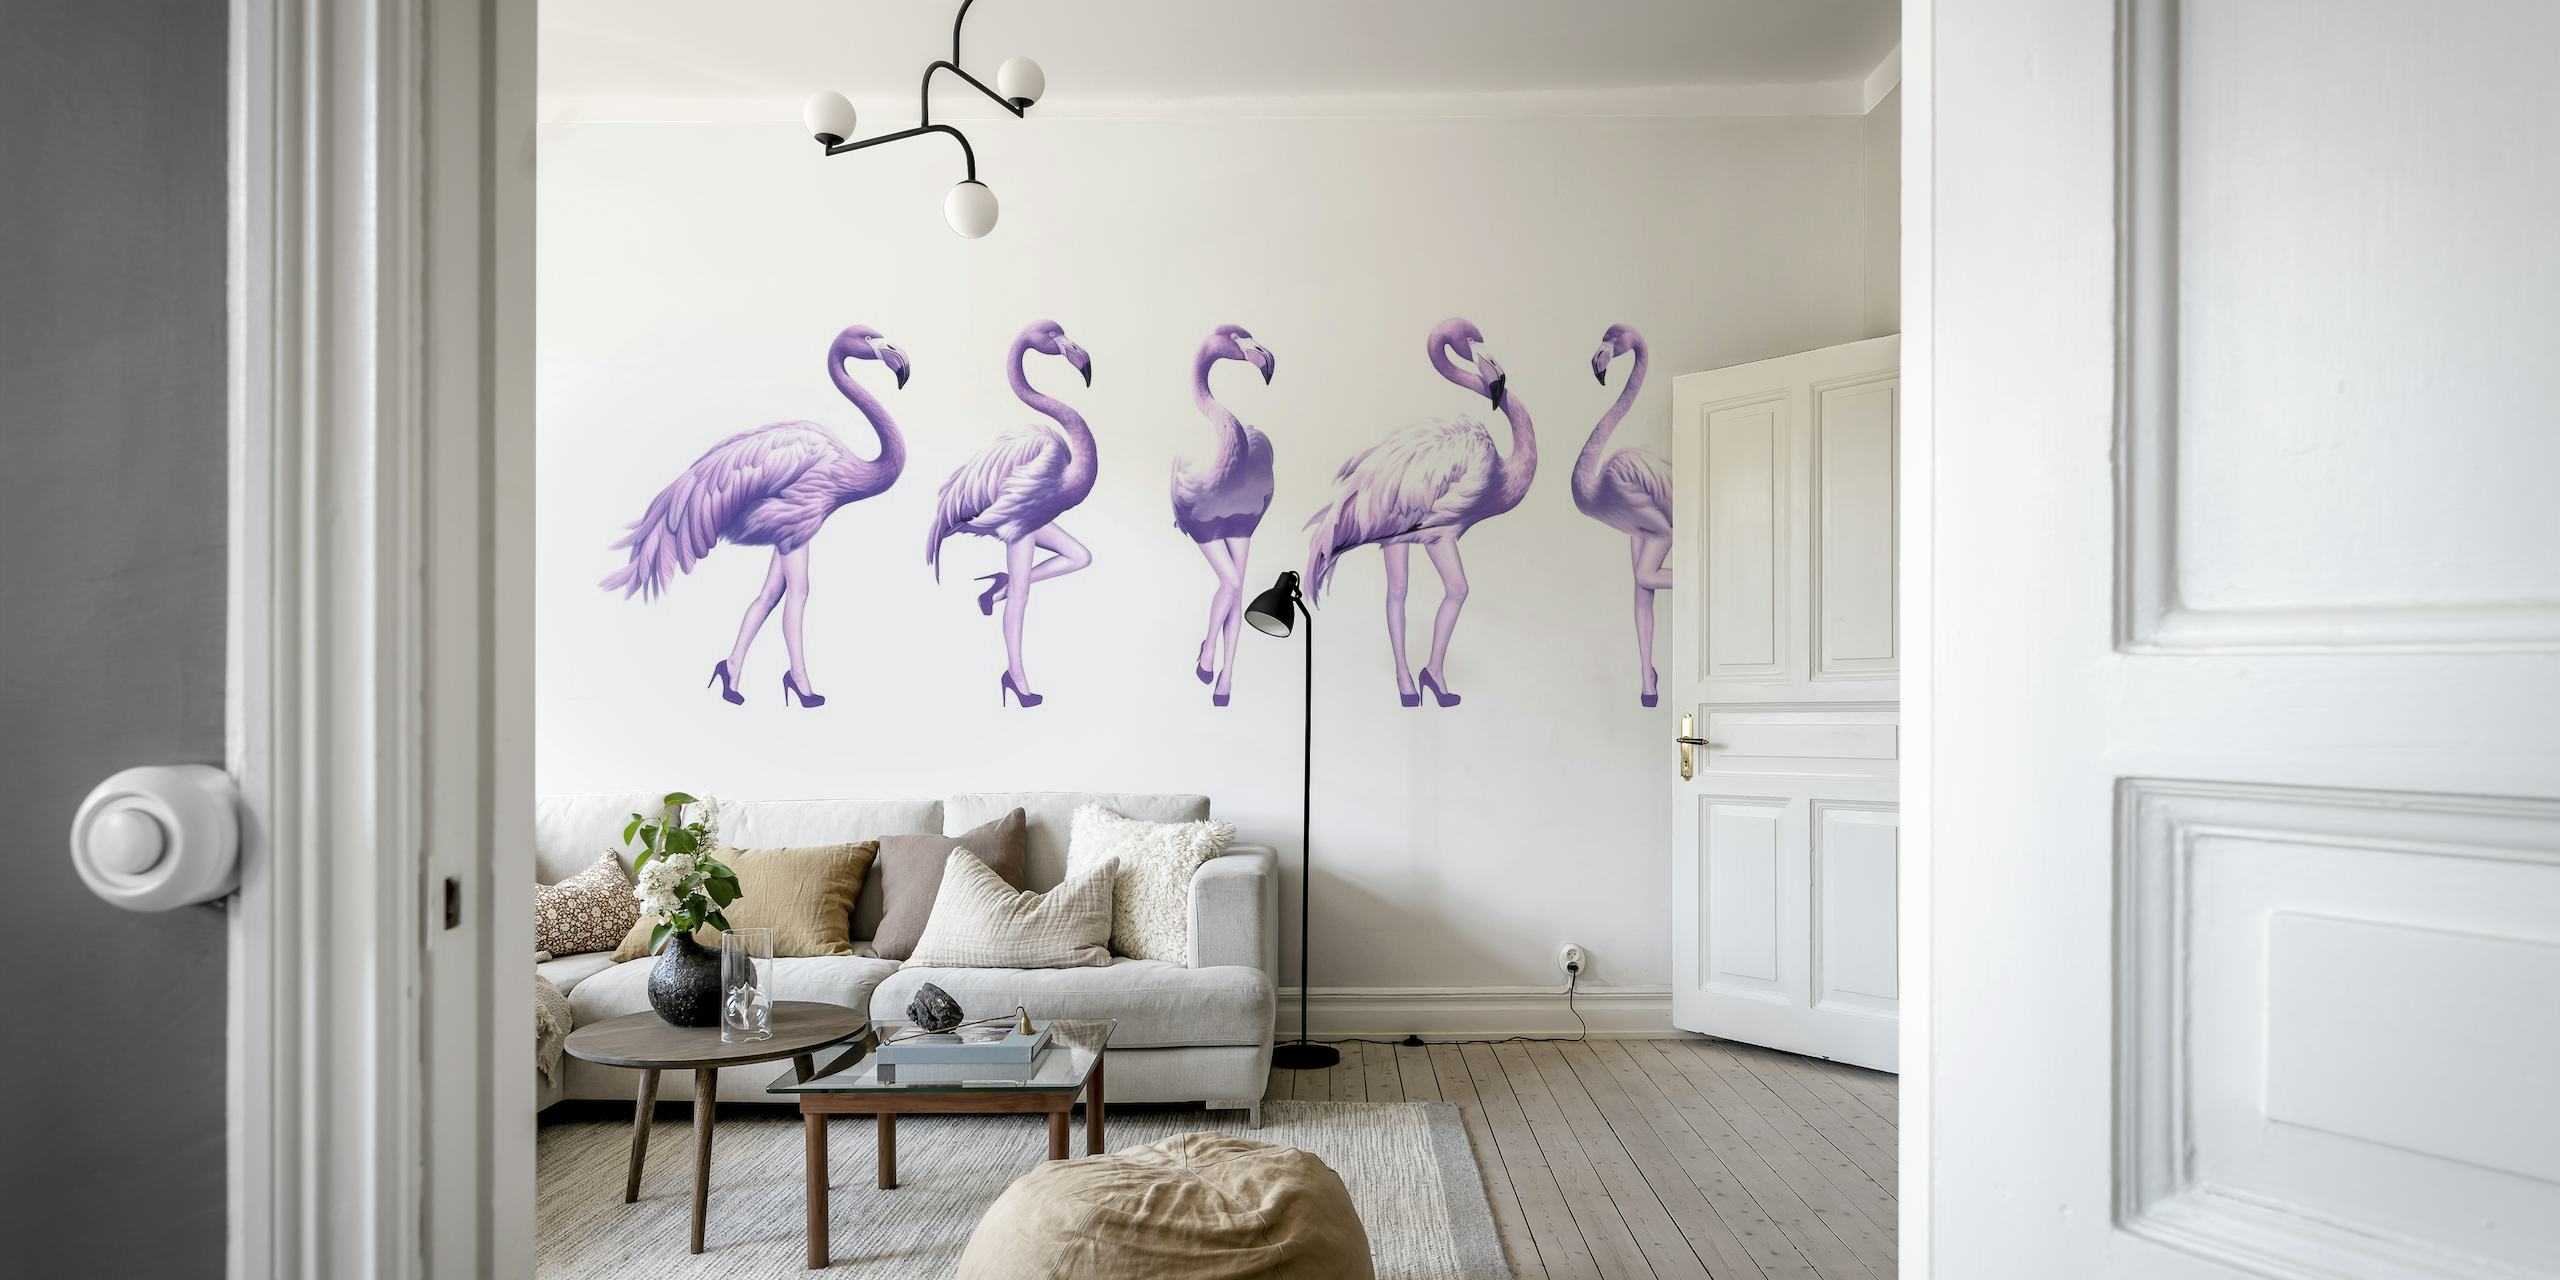 Five purple flamingos on a wall mural from happywall.com